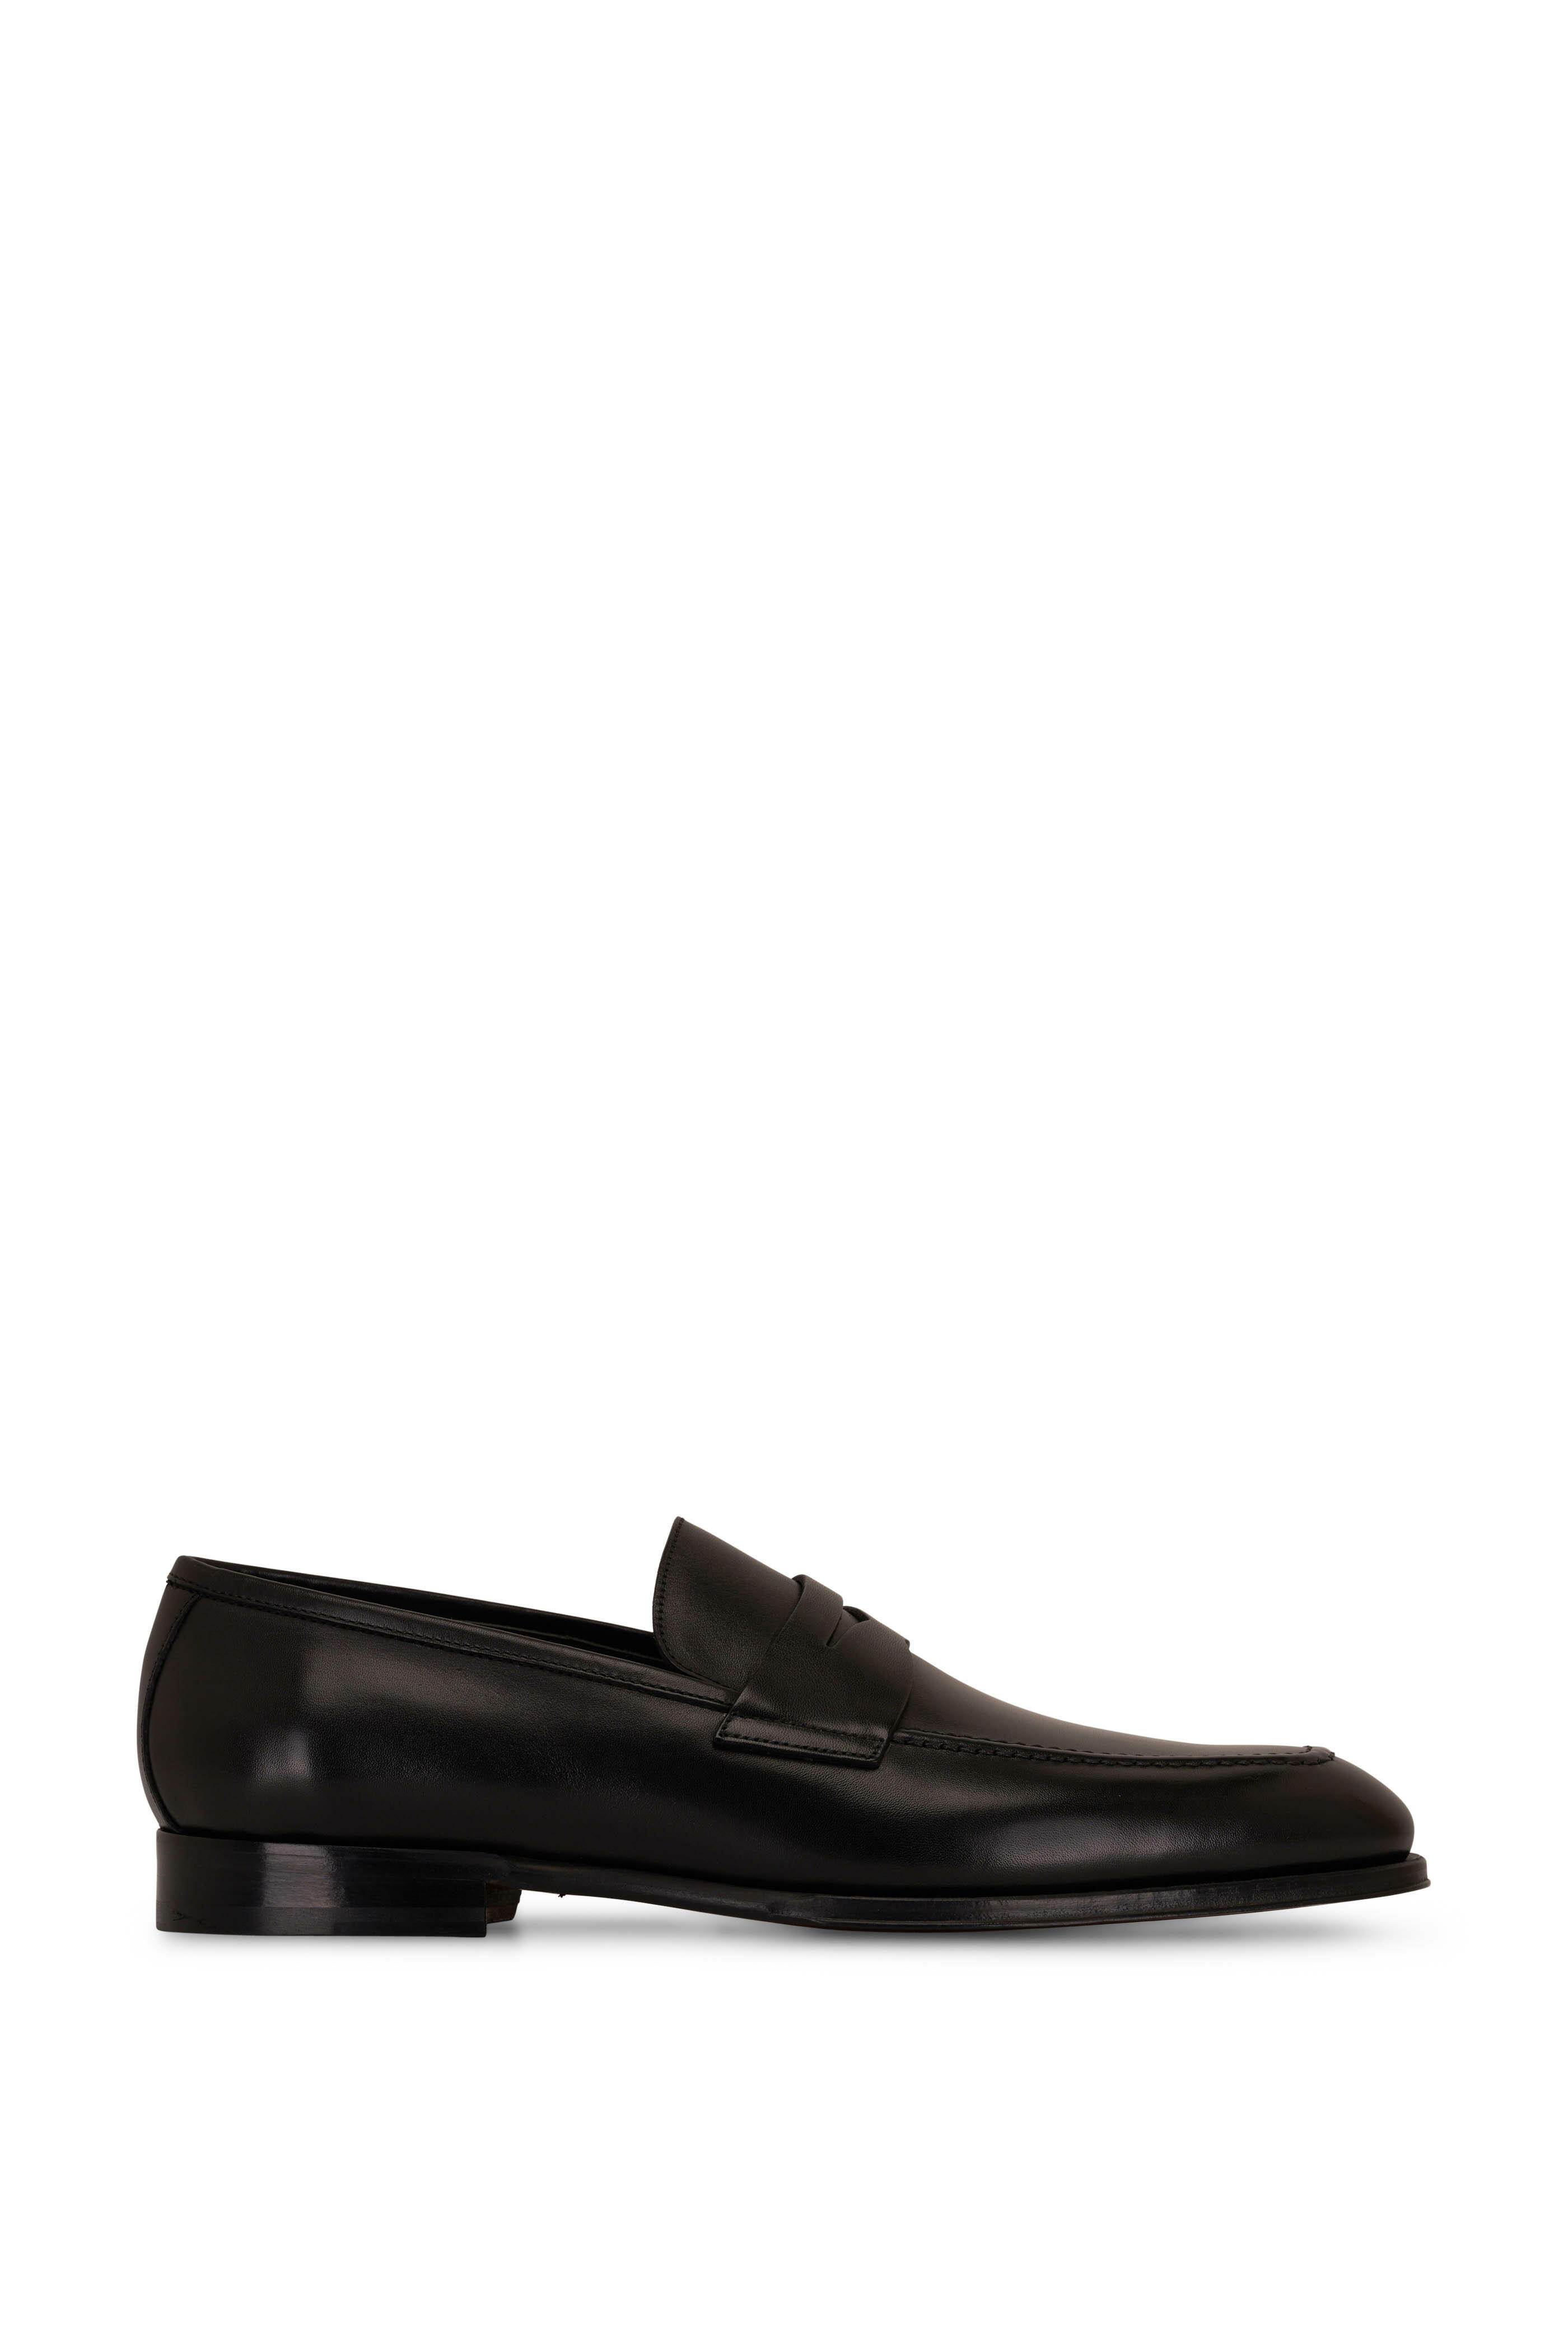 To Boot New York - Marcus Black Leather Penny Loafer